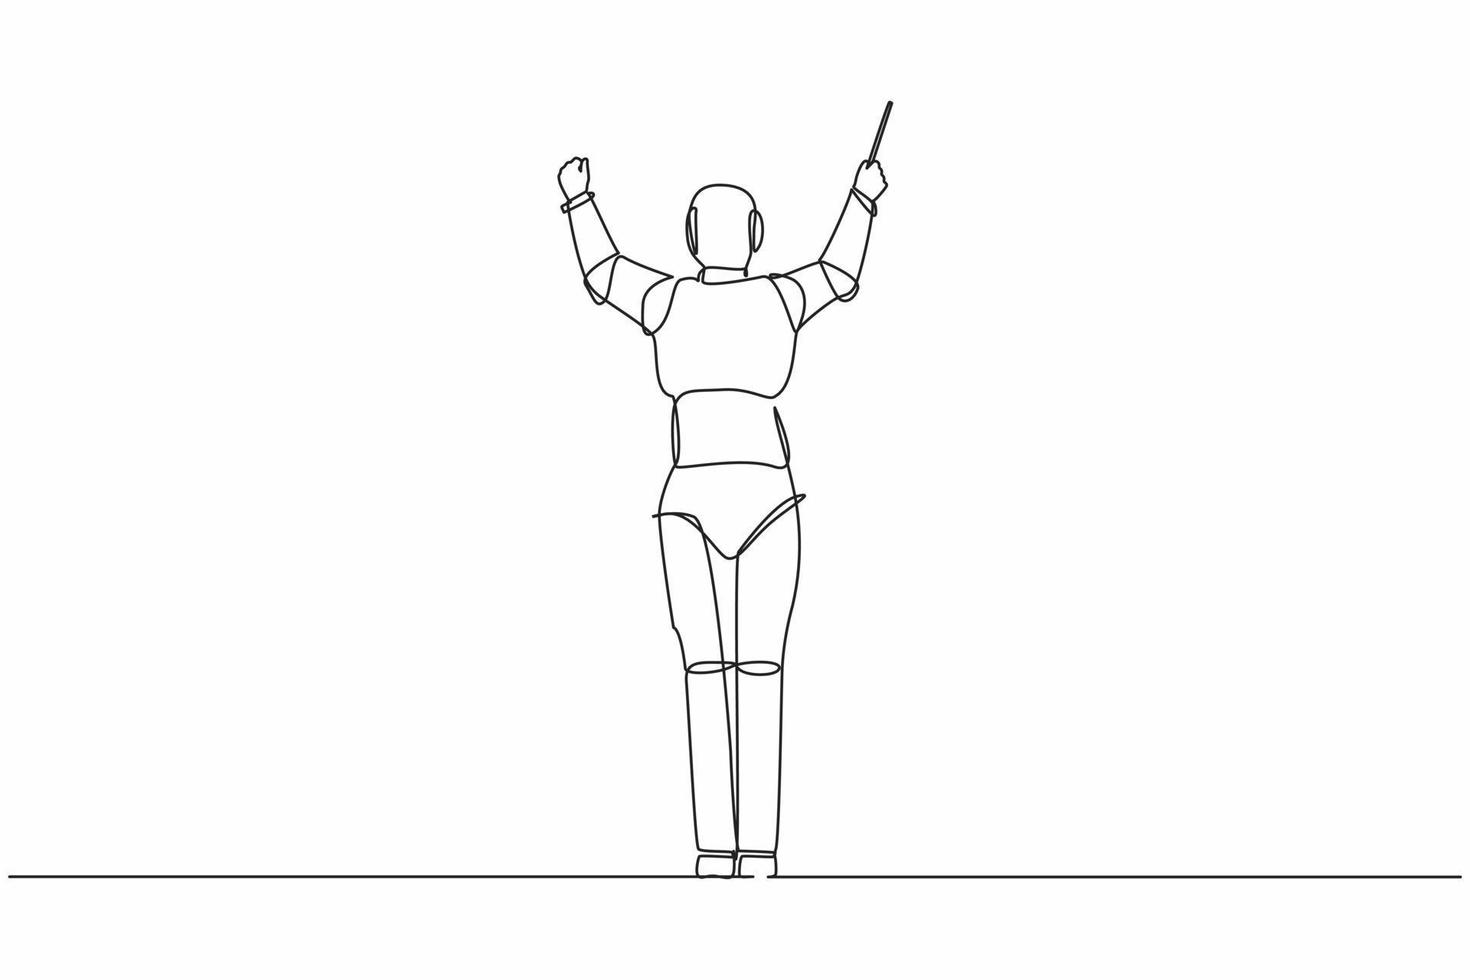 Continuous one line drawing back view of robot conductor performing on stage, directing symphony orchestra. Humanoid robot cybernetic organism. Single line draw design vector graphic illustration